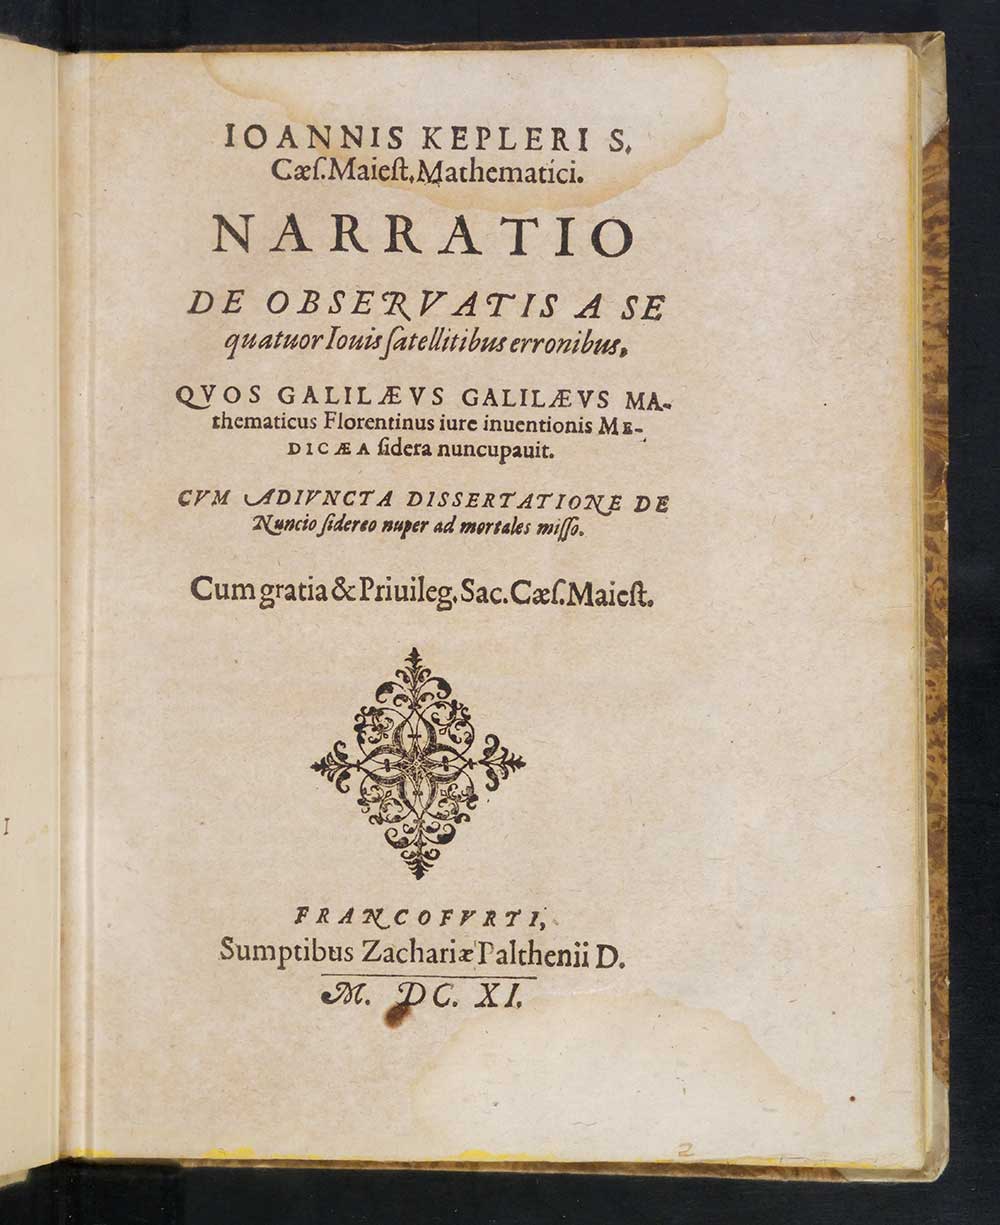 Title page for the Narratio, 1611